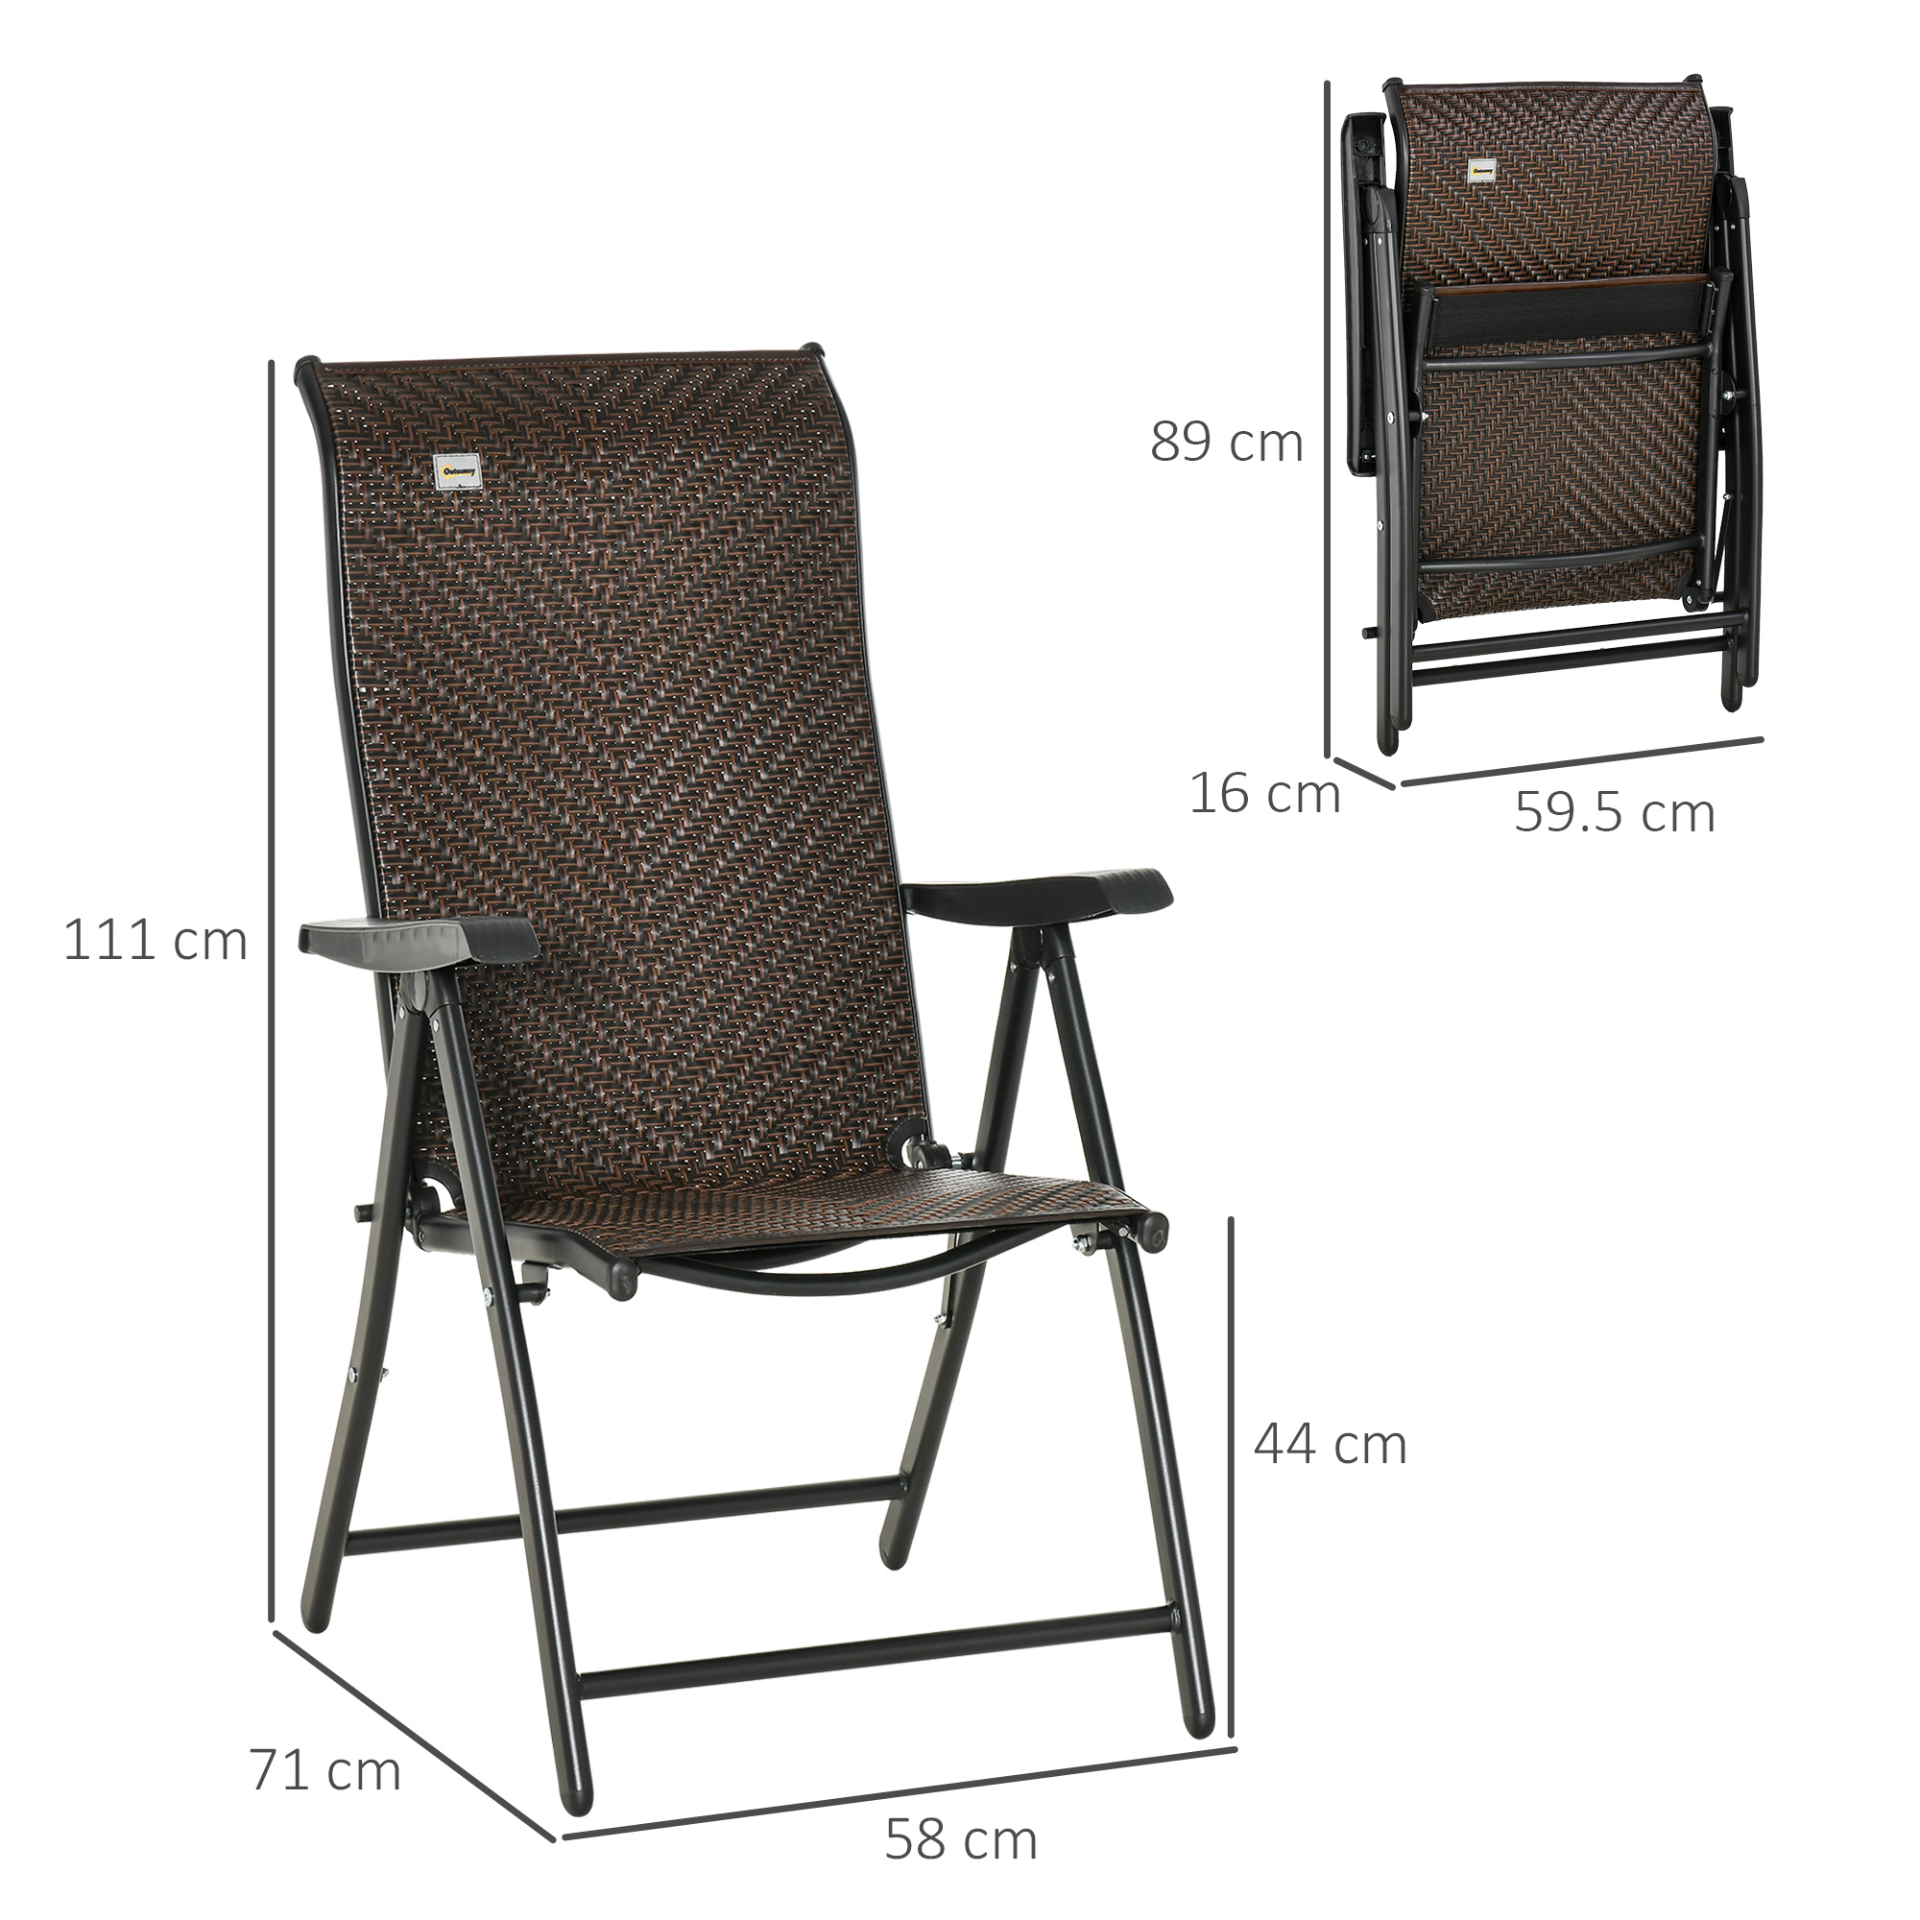 Outsunny Set of 2 Outdoor Wicker Folding Chairs | Adjustable Backrest | Red Brown Camping Chair Cosy Camping Co.   